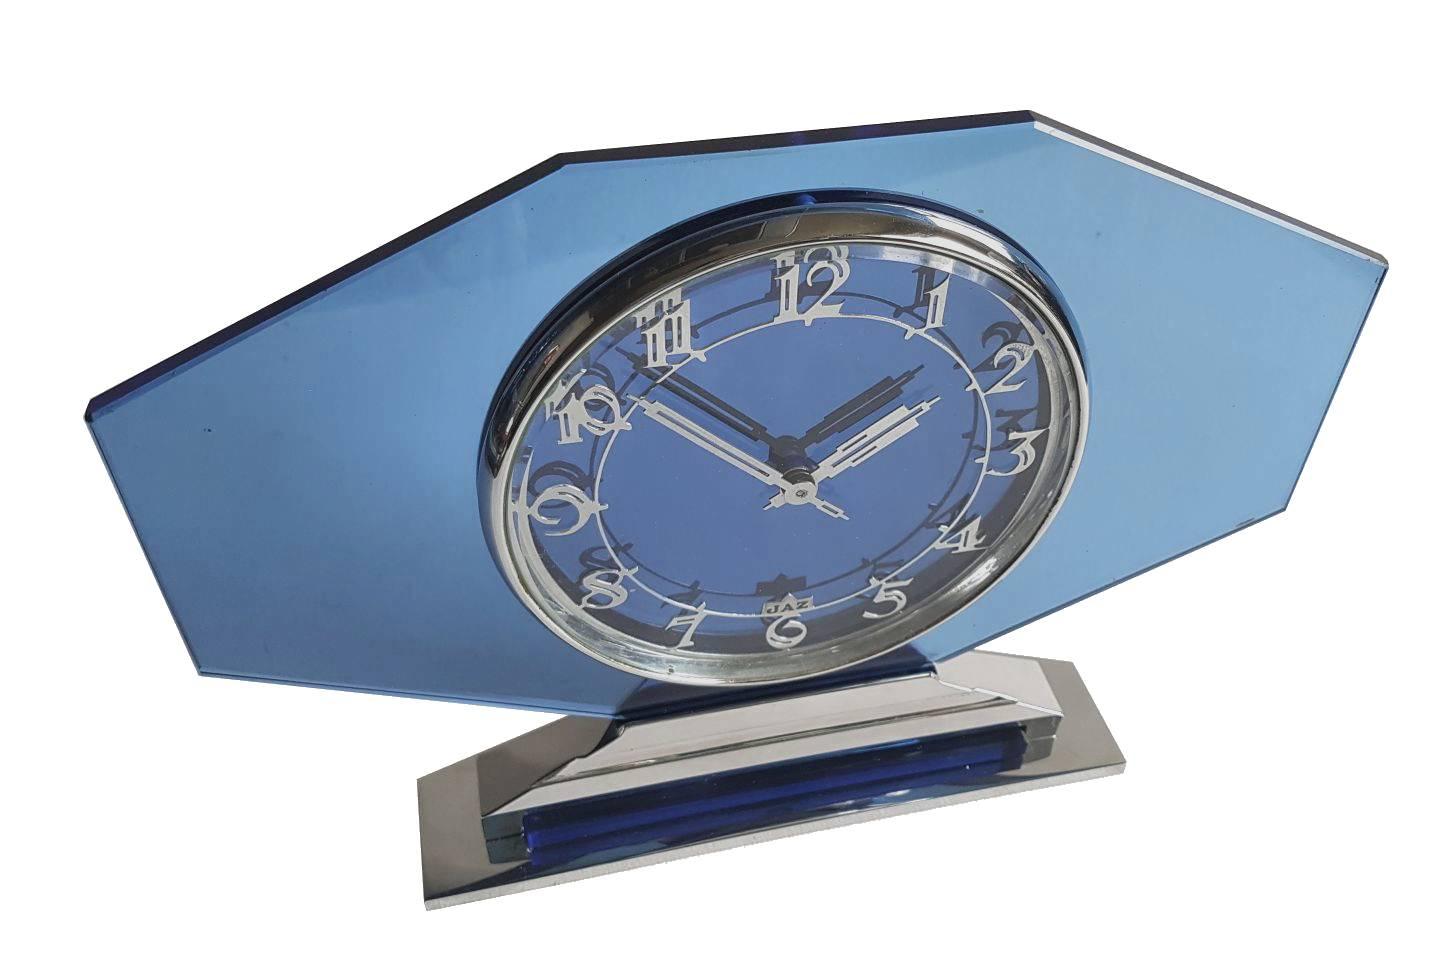 Very impressive and rare 1930s Art Deco blue glass and chrome clock by the French makers Jaz. Superb condition, both the glass and chrome are perfect as you could expect from a period piece of 90 odd years. We've had the clock mechanism fully